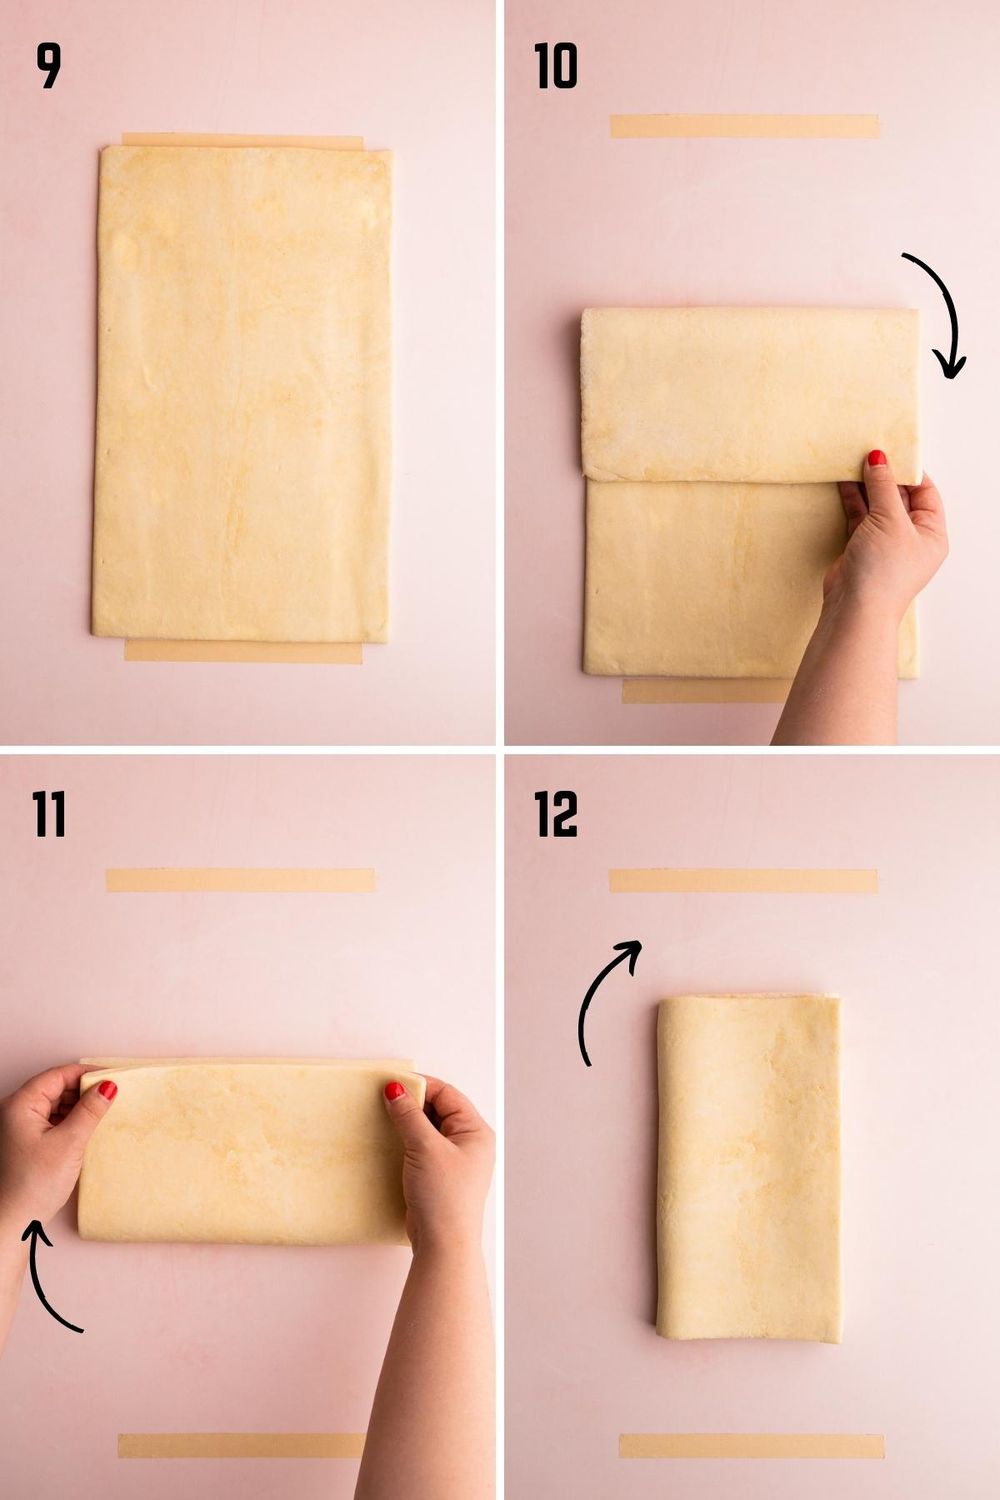 Numbered steps to make puff pastry.